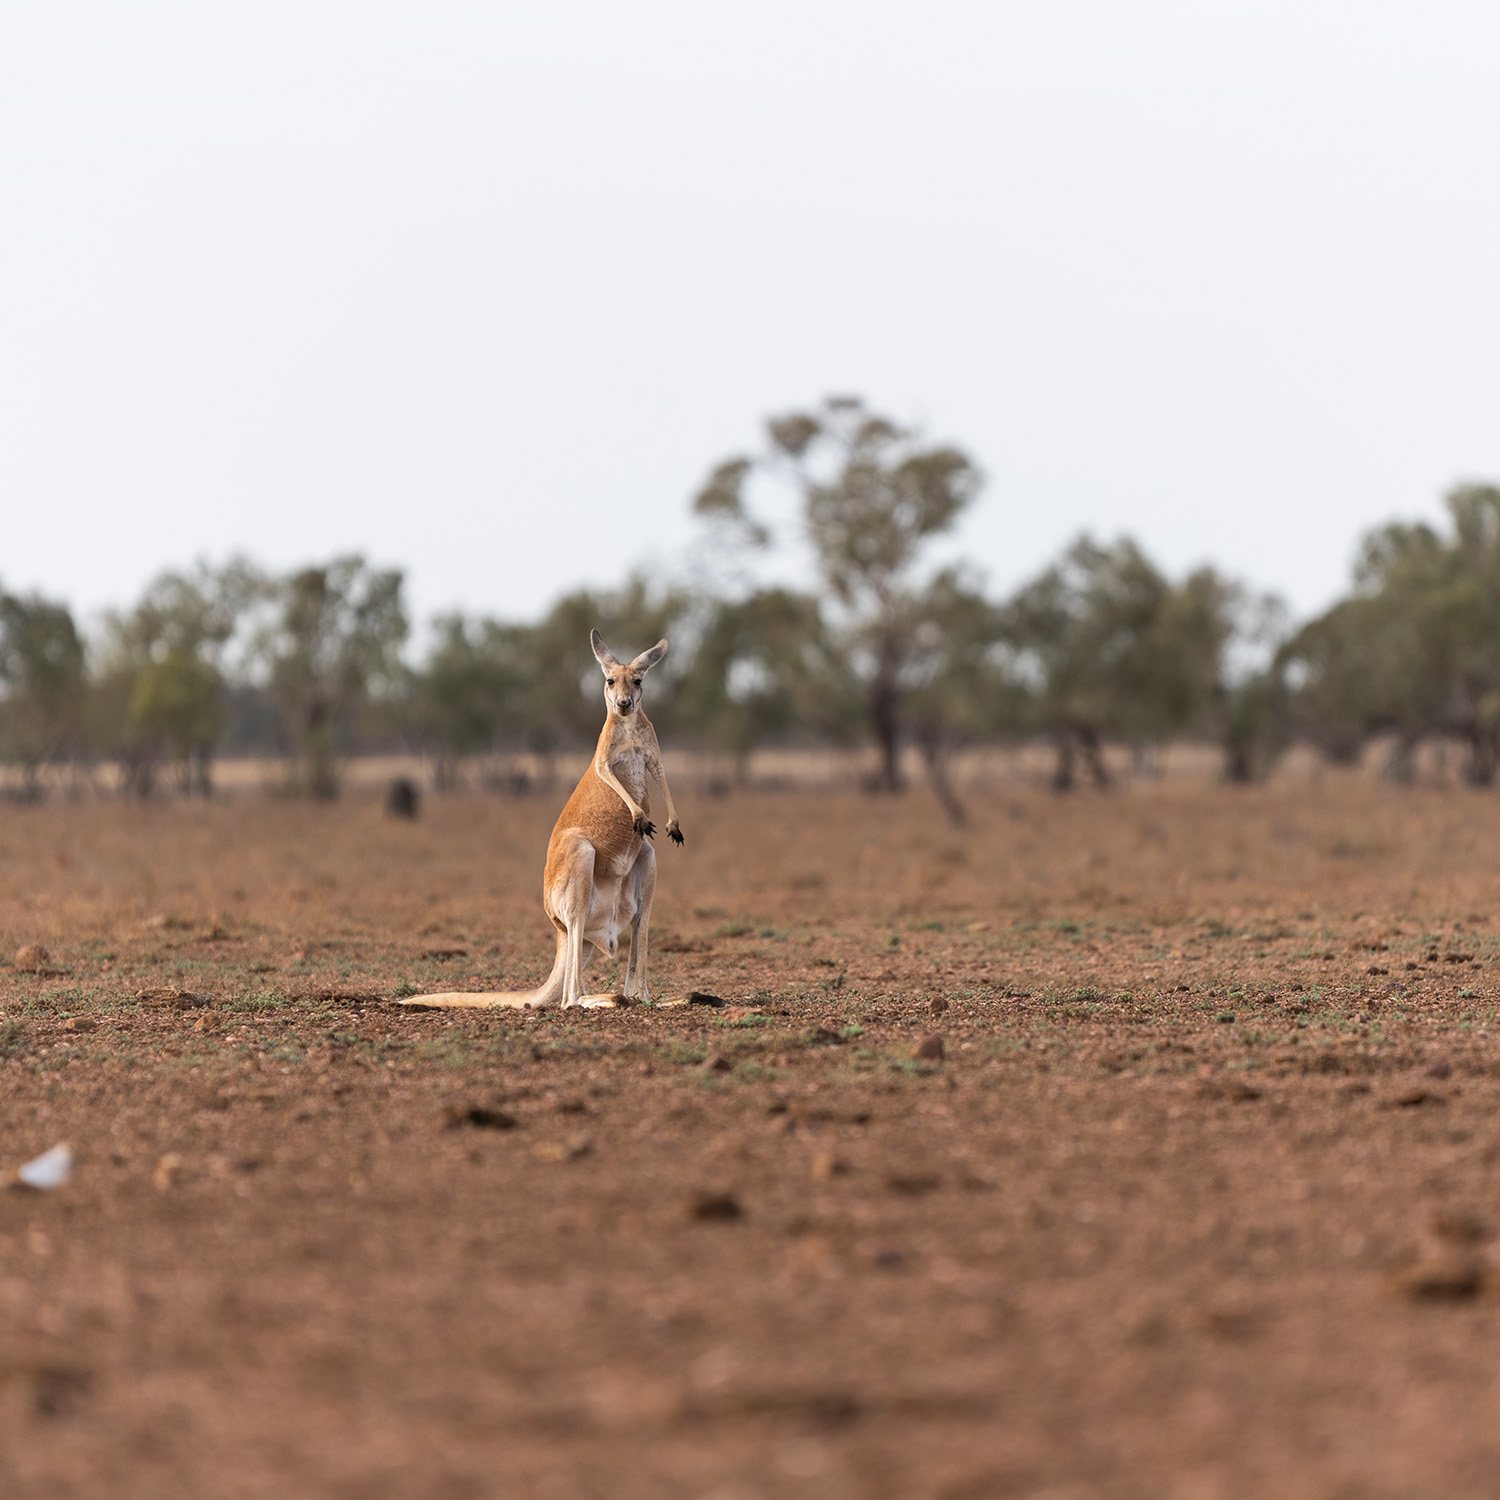 A kangaroo in the outback, looking into the camera